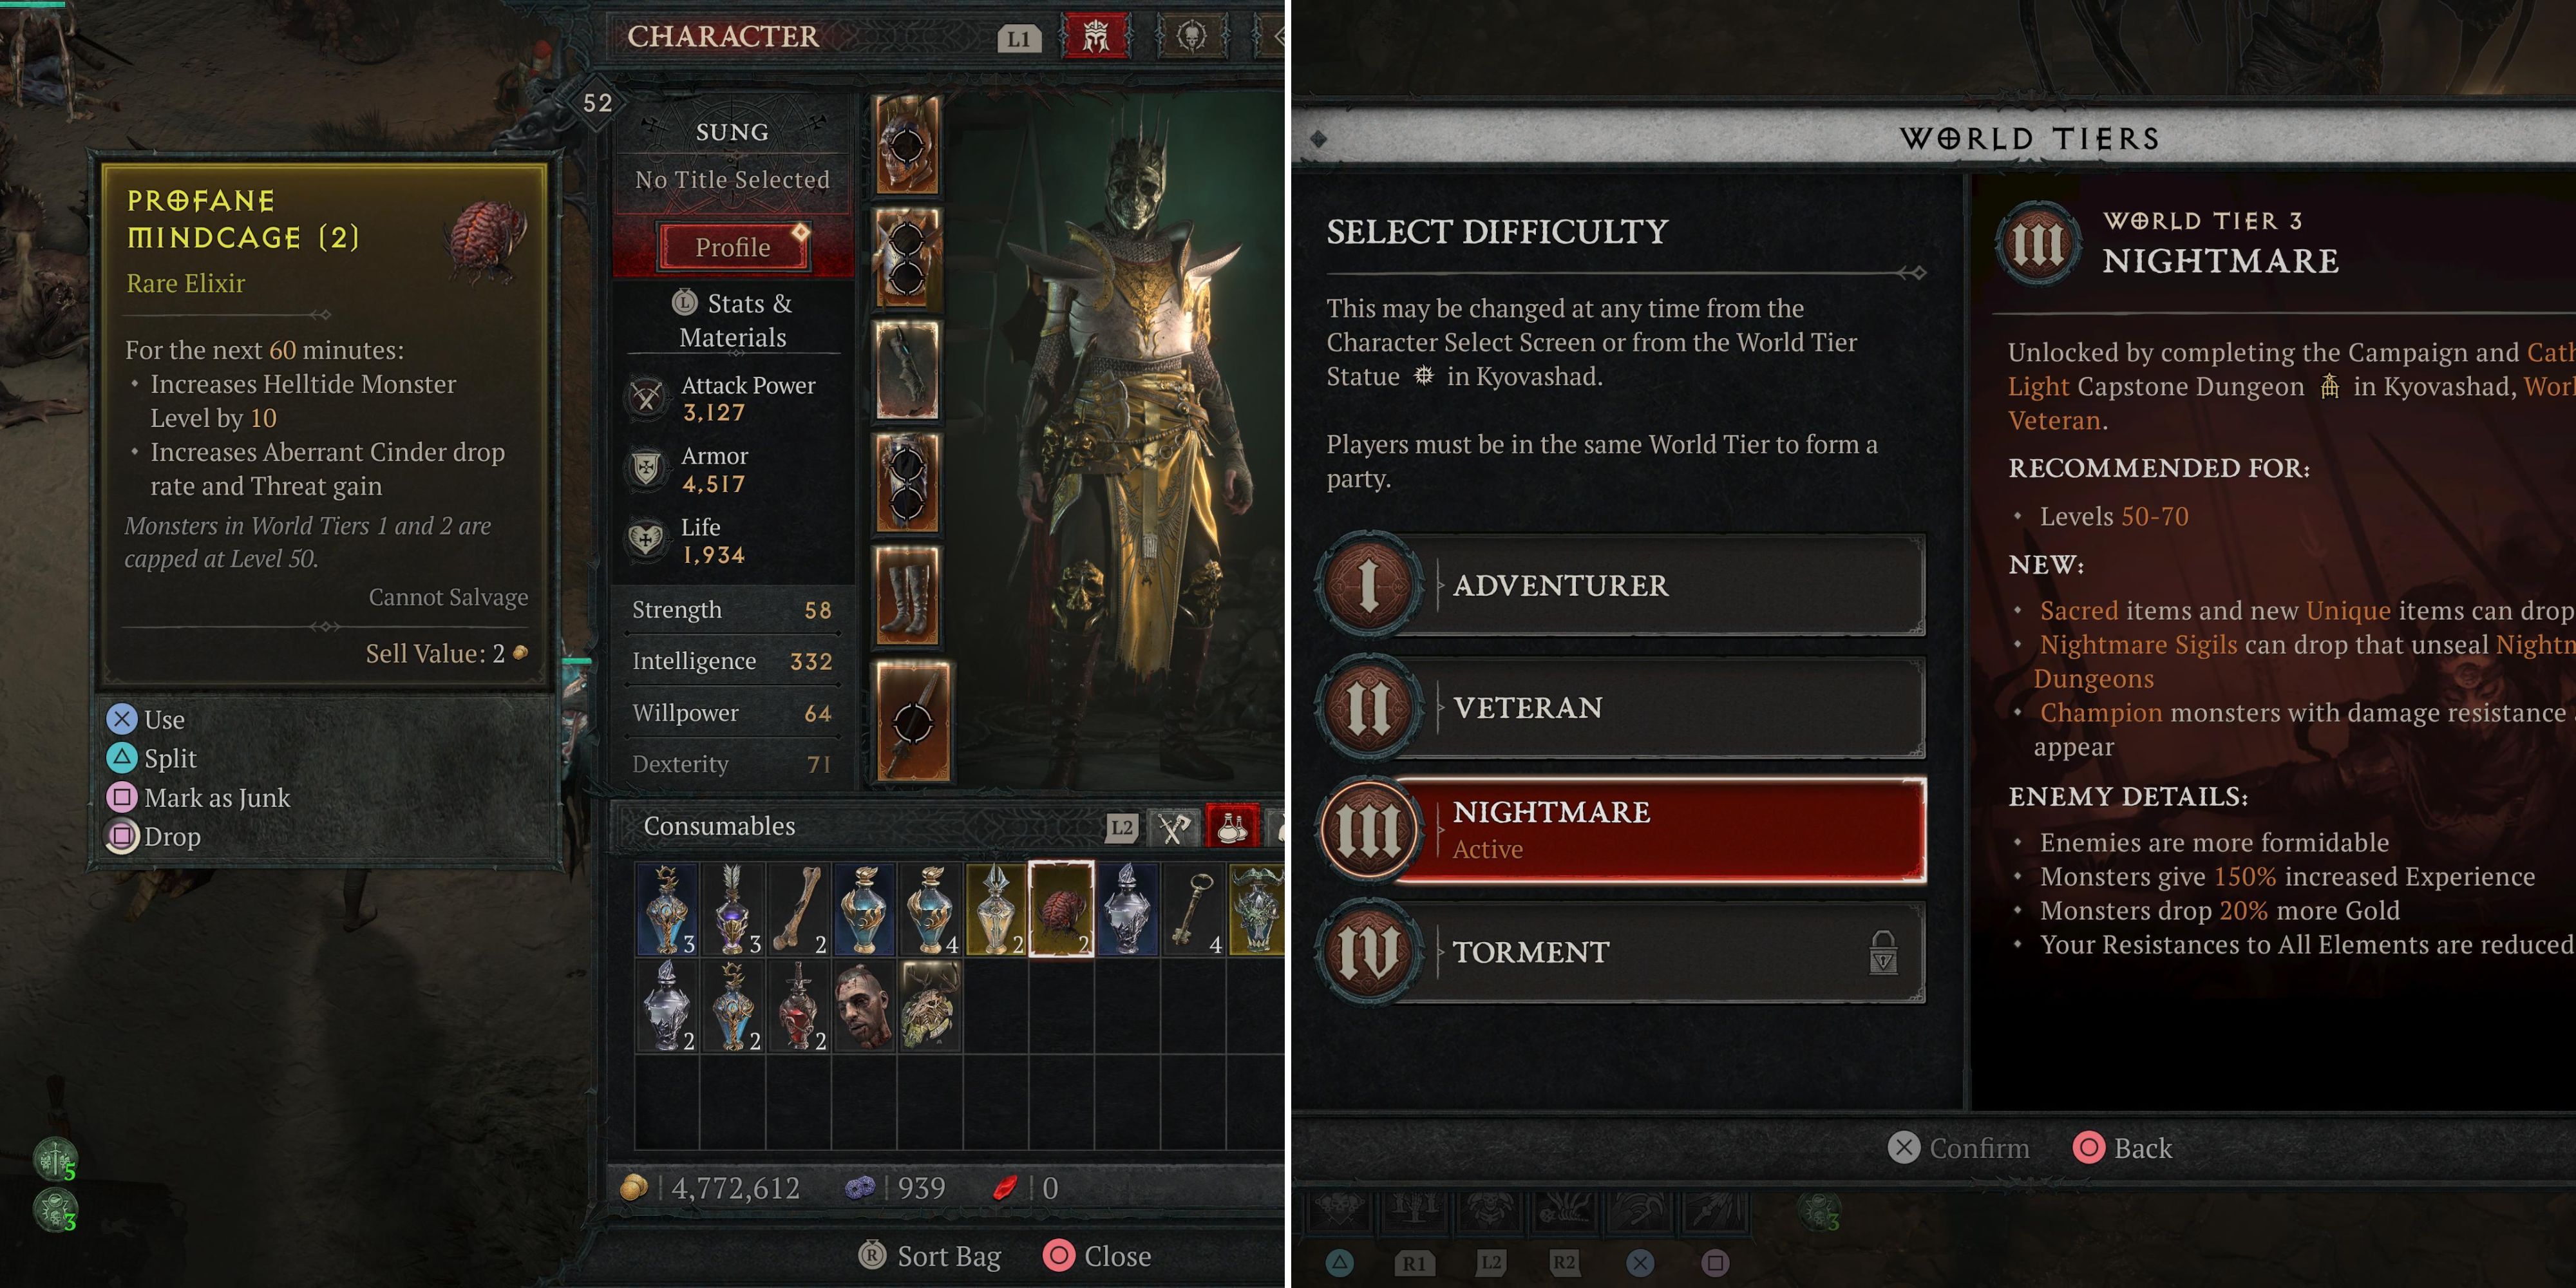 A Profane Mindcage In The Inventory & The Nightmare World Tier 